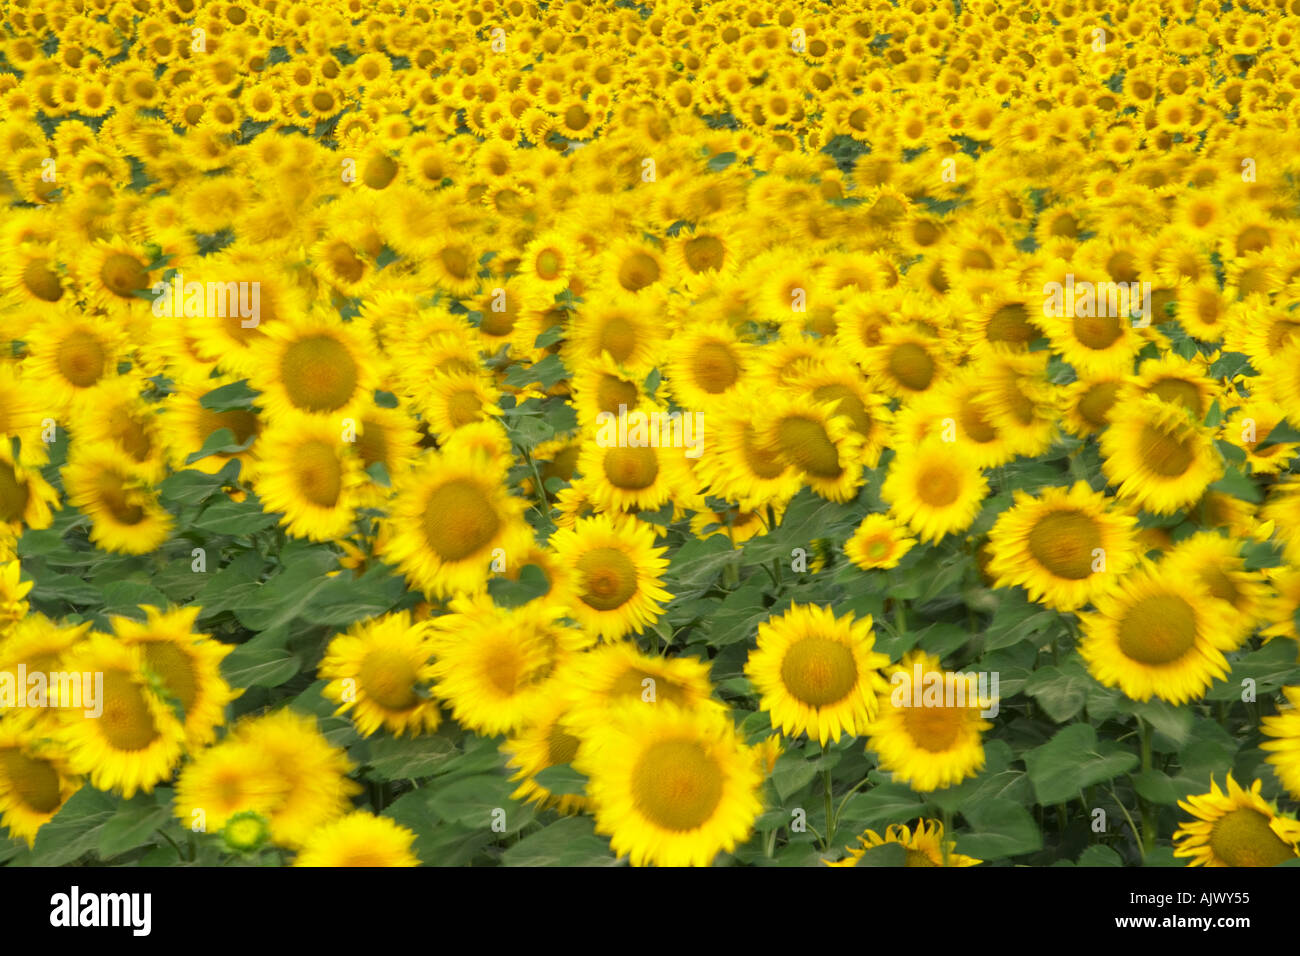 Sunflowers Blurred motion France Stock Photo